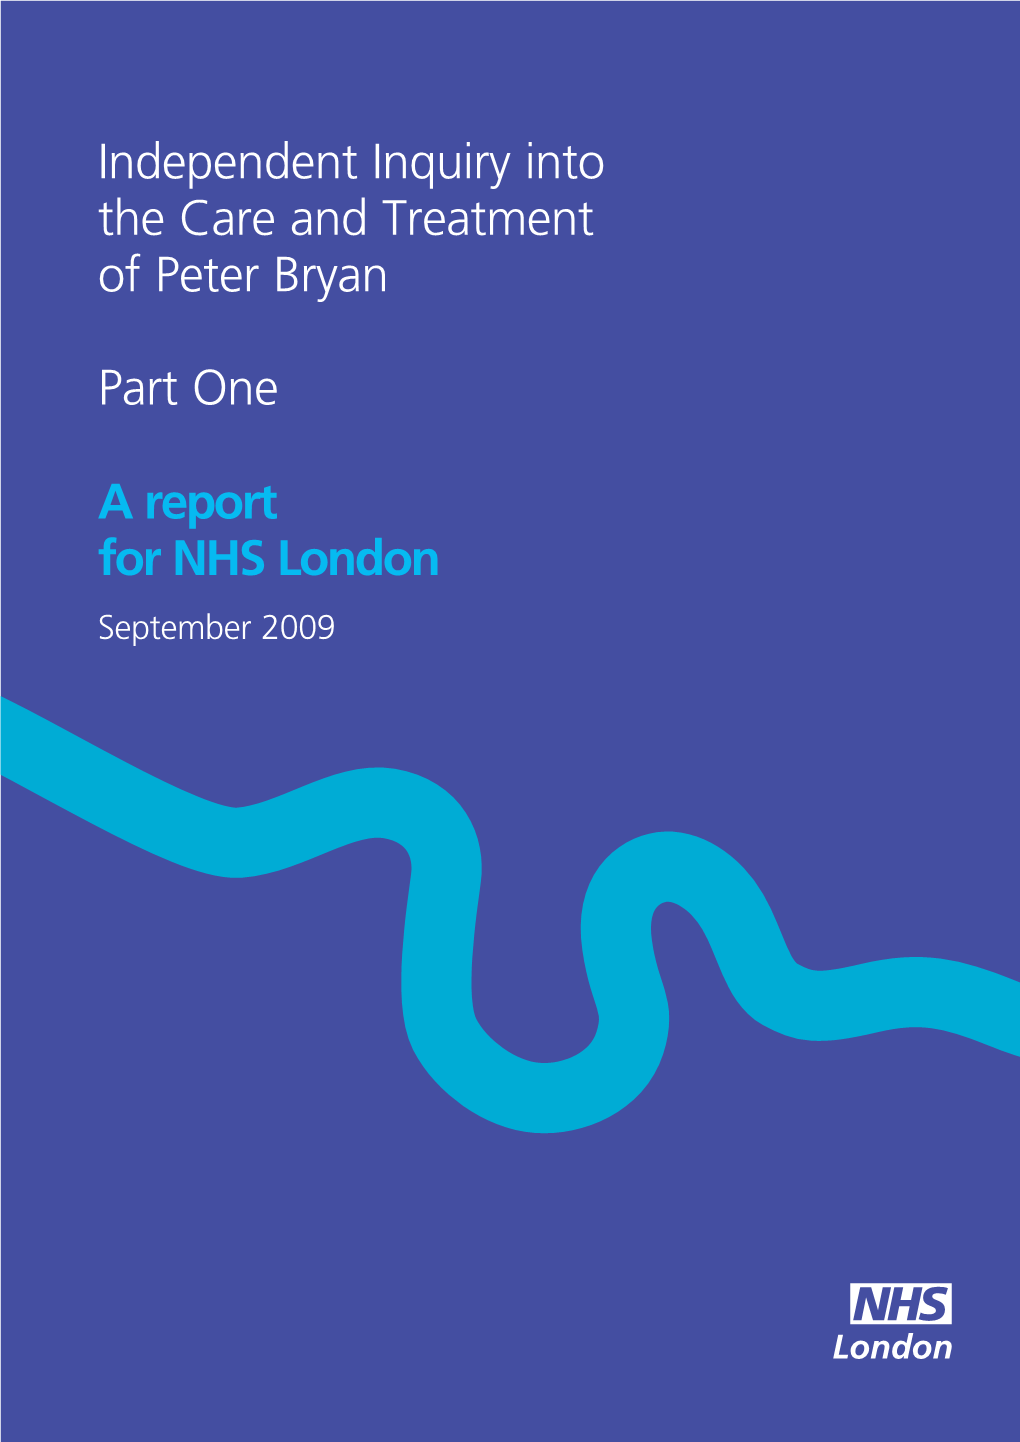 Independent Inquiry Into the Care and Treatment of Peter Bryan Part One